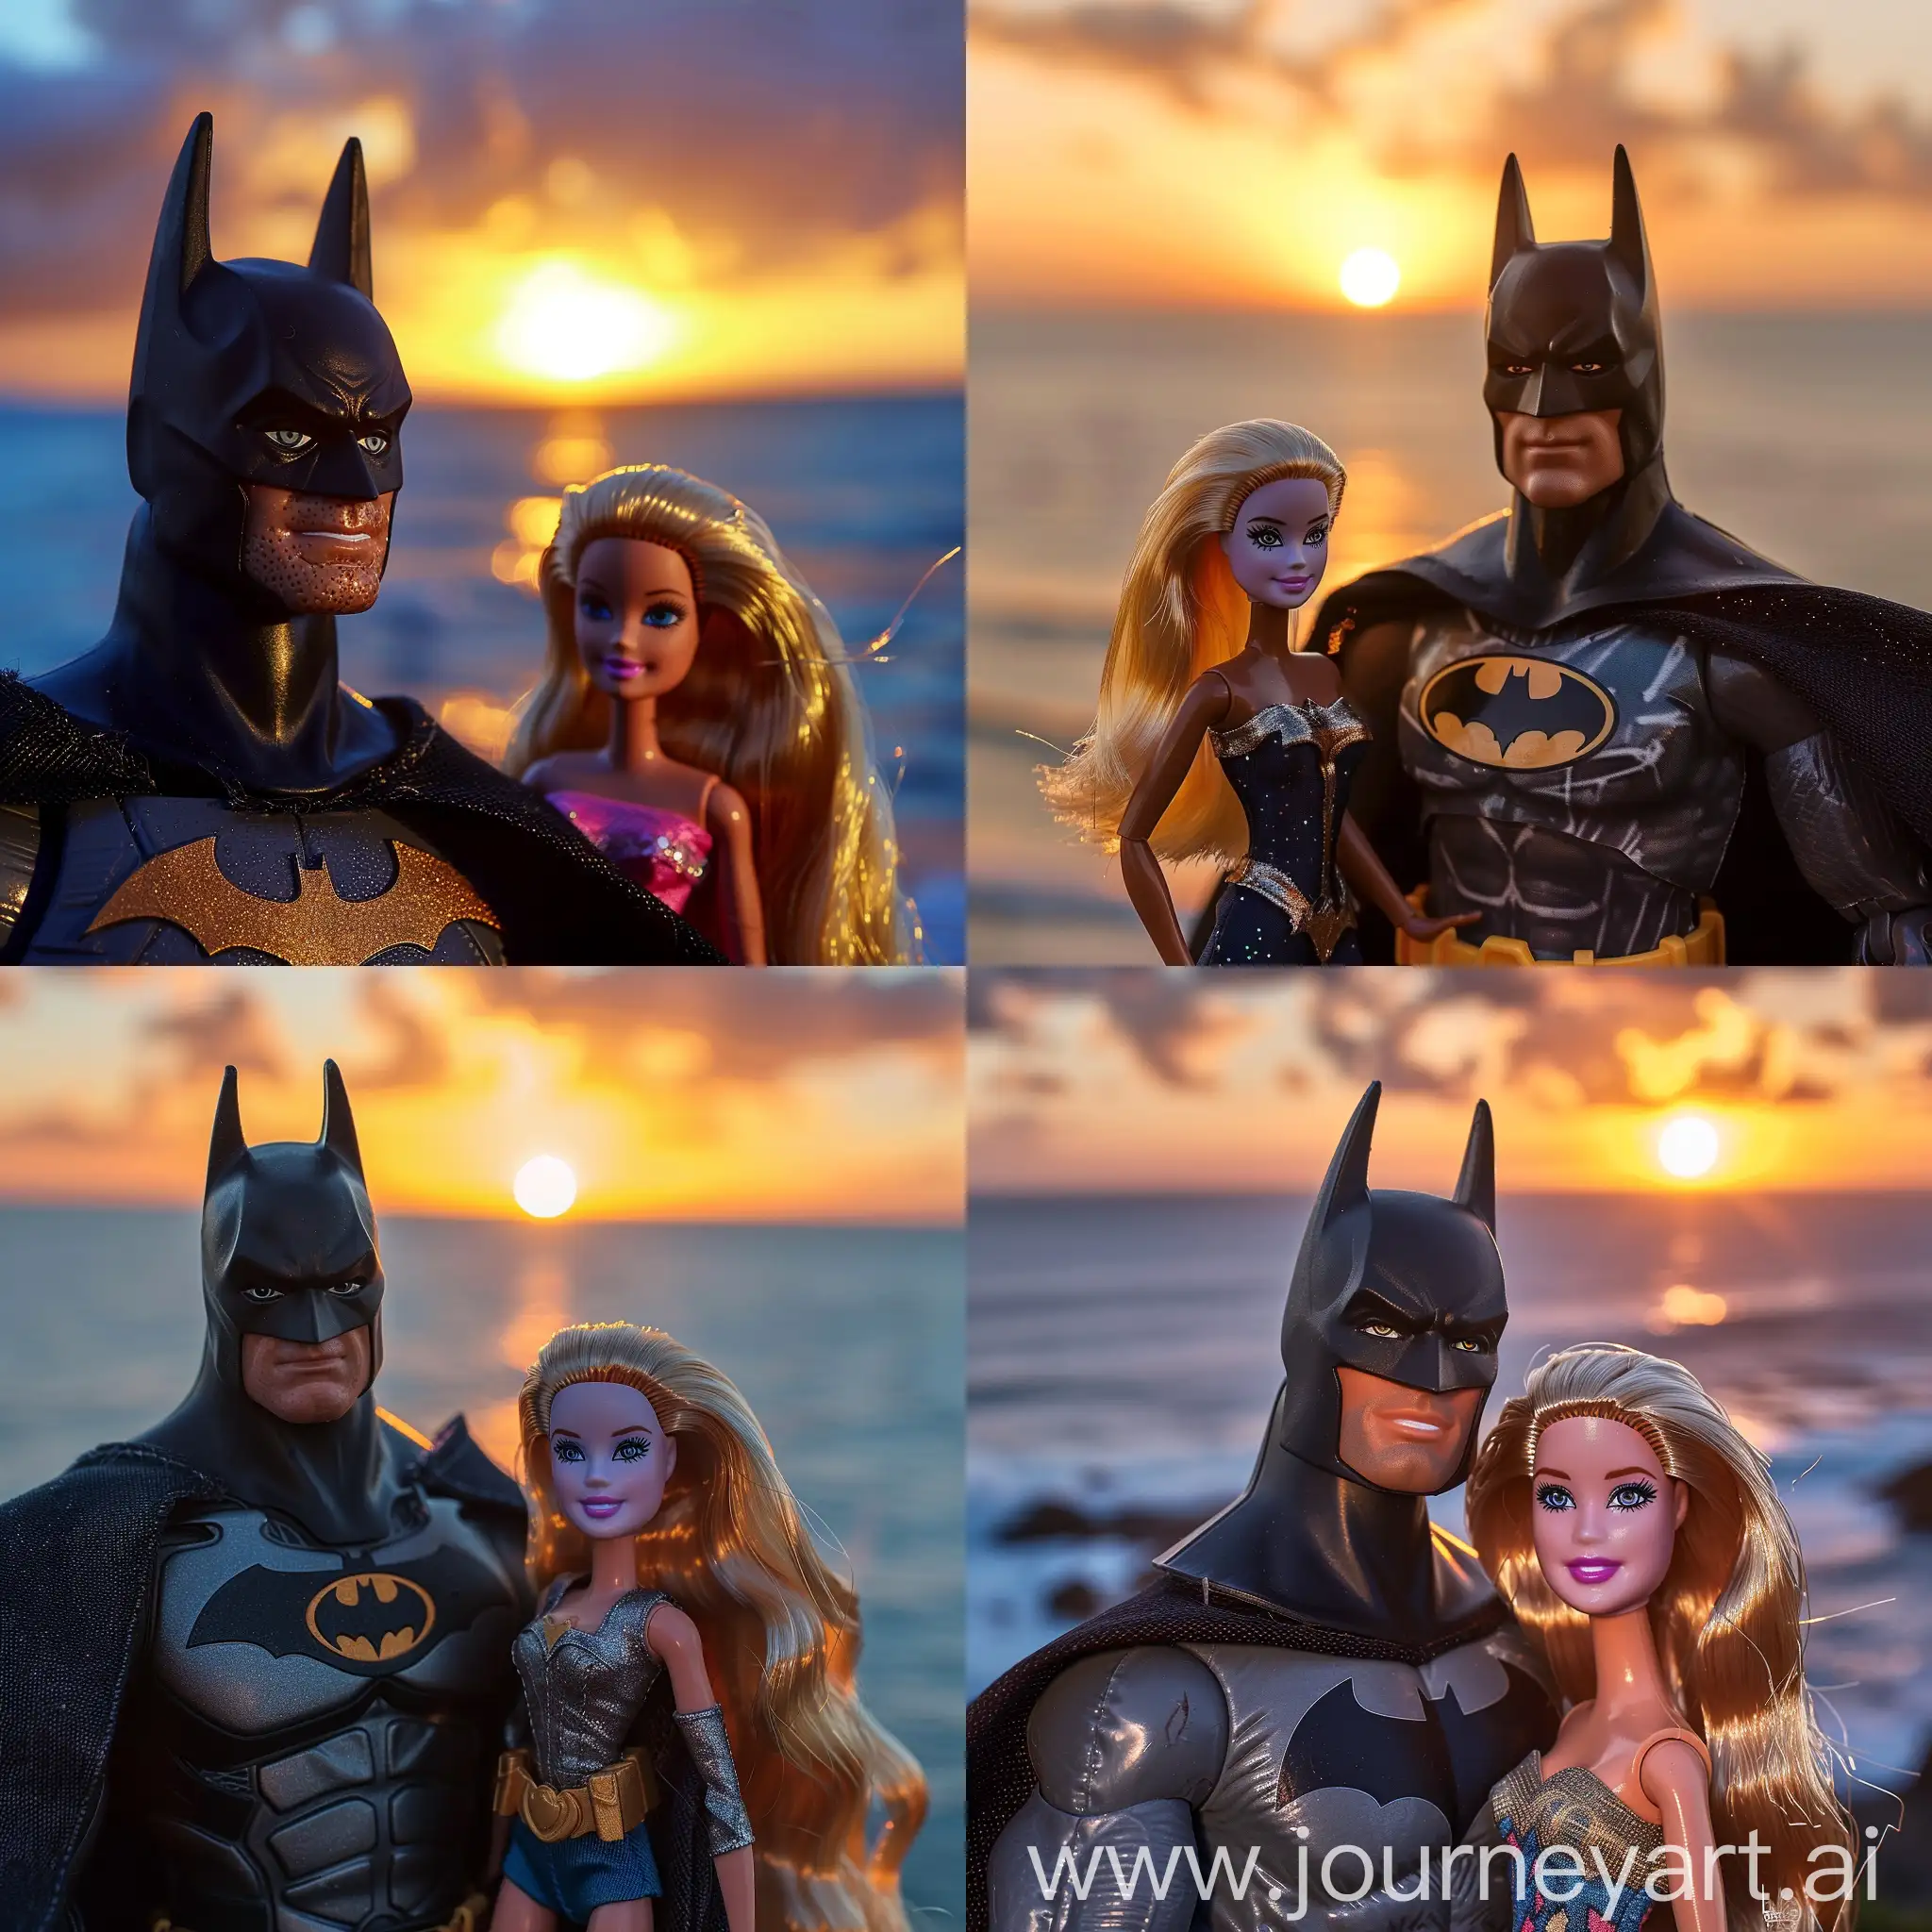 Batman-and-Barbie-Silhouettes-at-Sunset-by-the-Sea